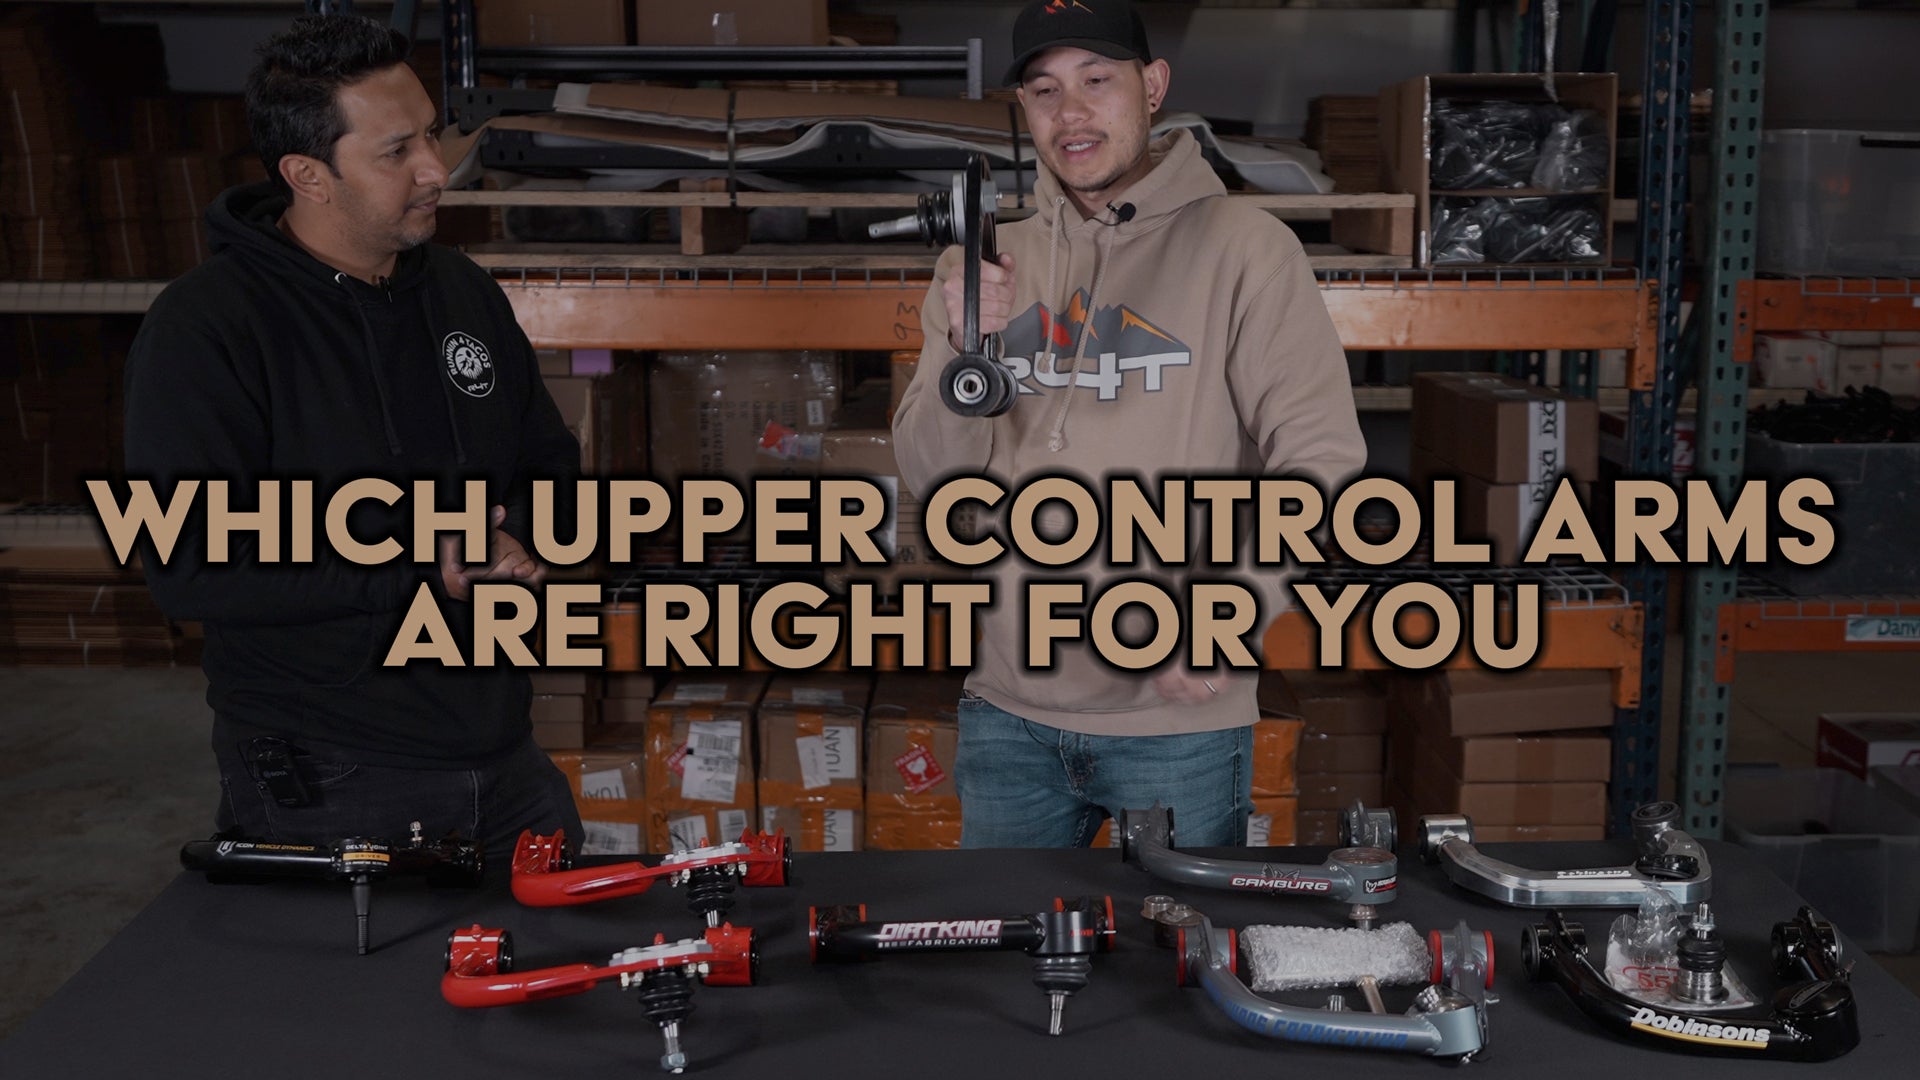 Toyota Upper Control Arms: A Necessity for Installing a Lift Kit